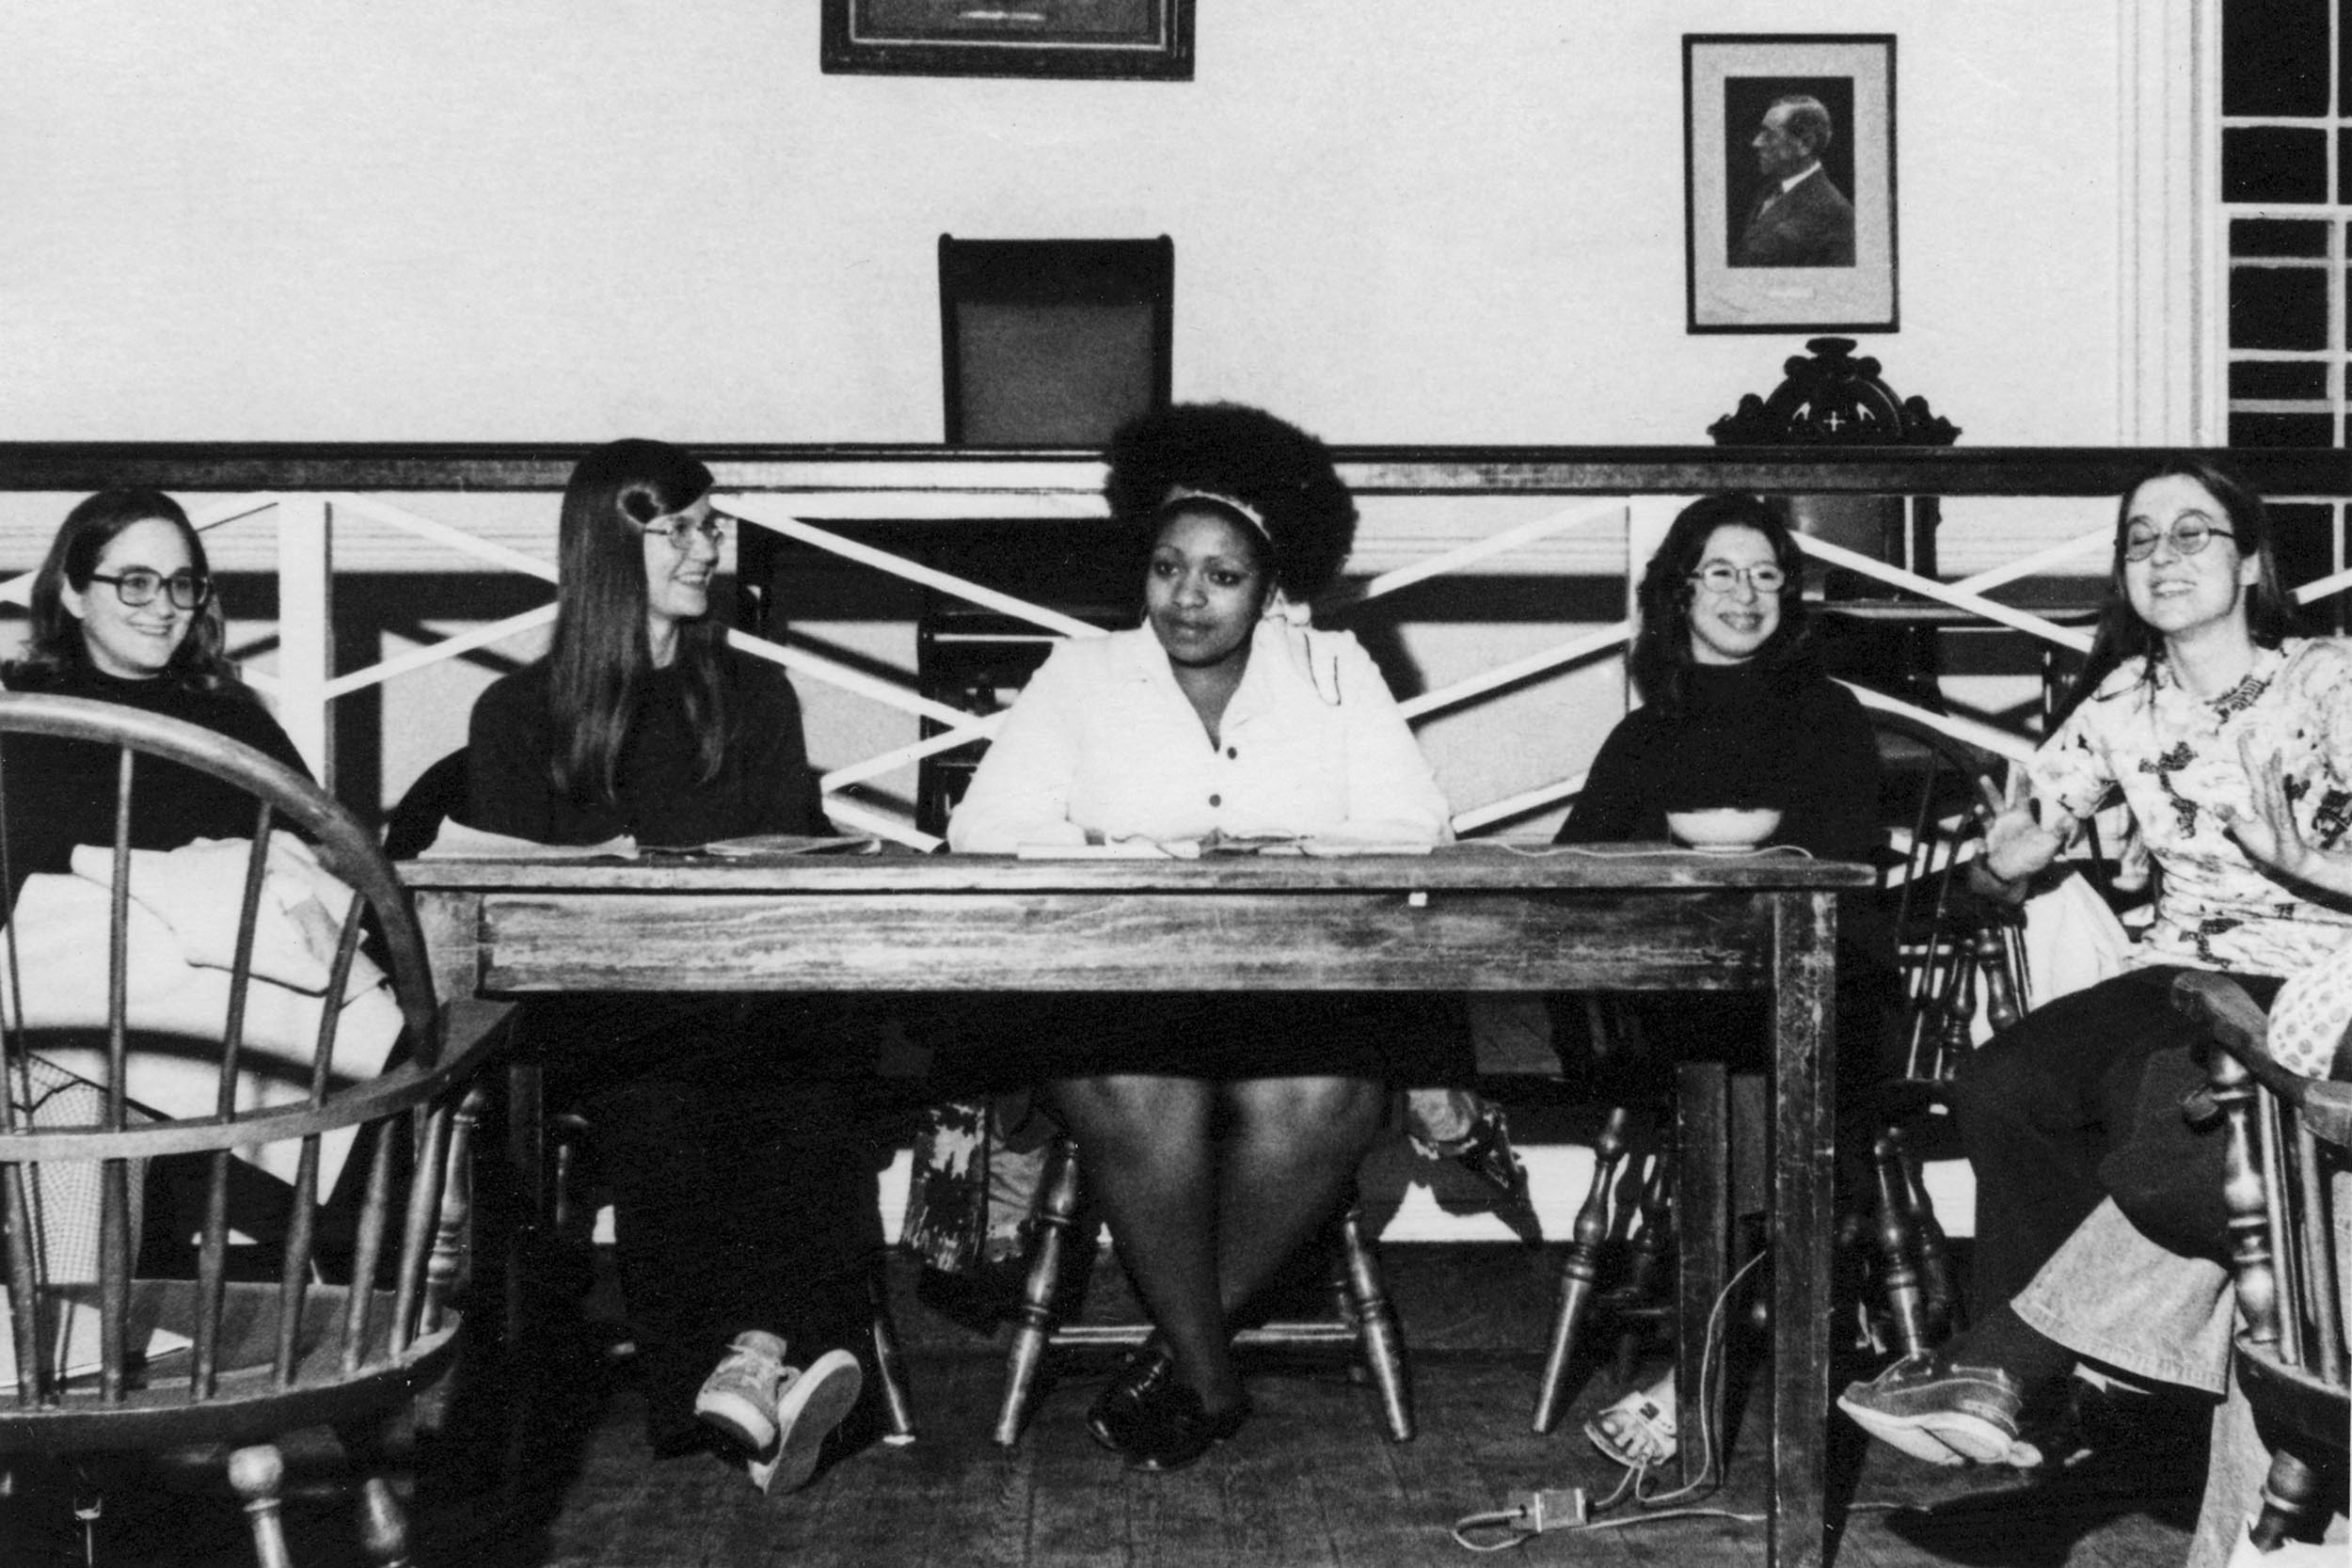 Black and white image of women sitting at a table having a discussion